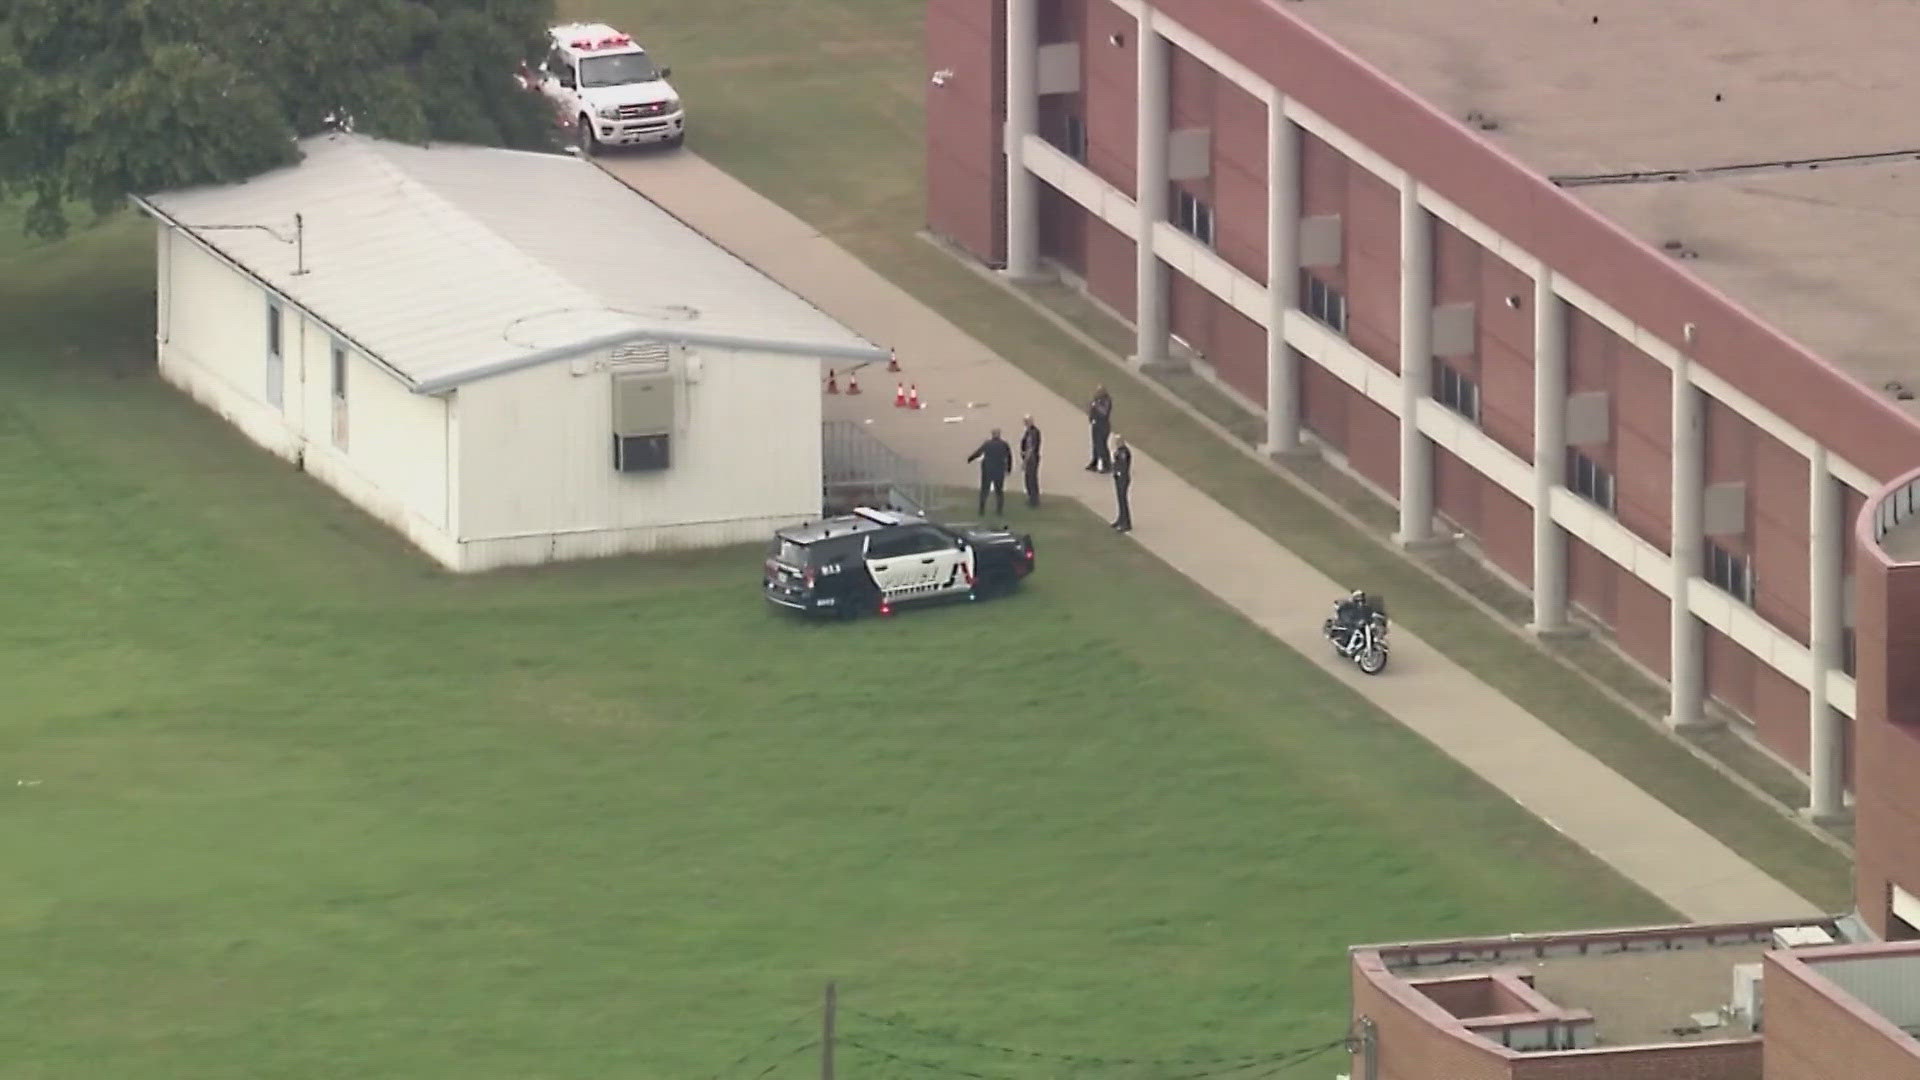 The shooting at Arlington Bowie High School has raised school safety concerns.